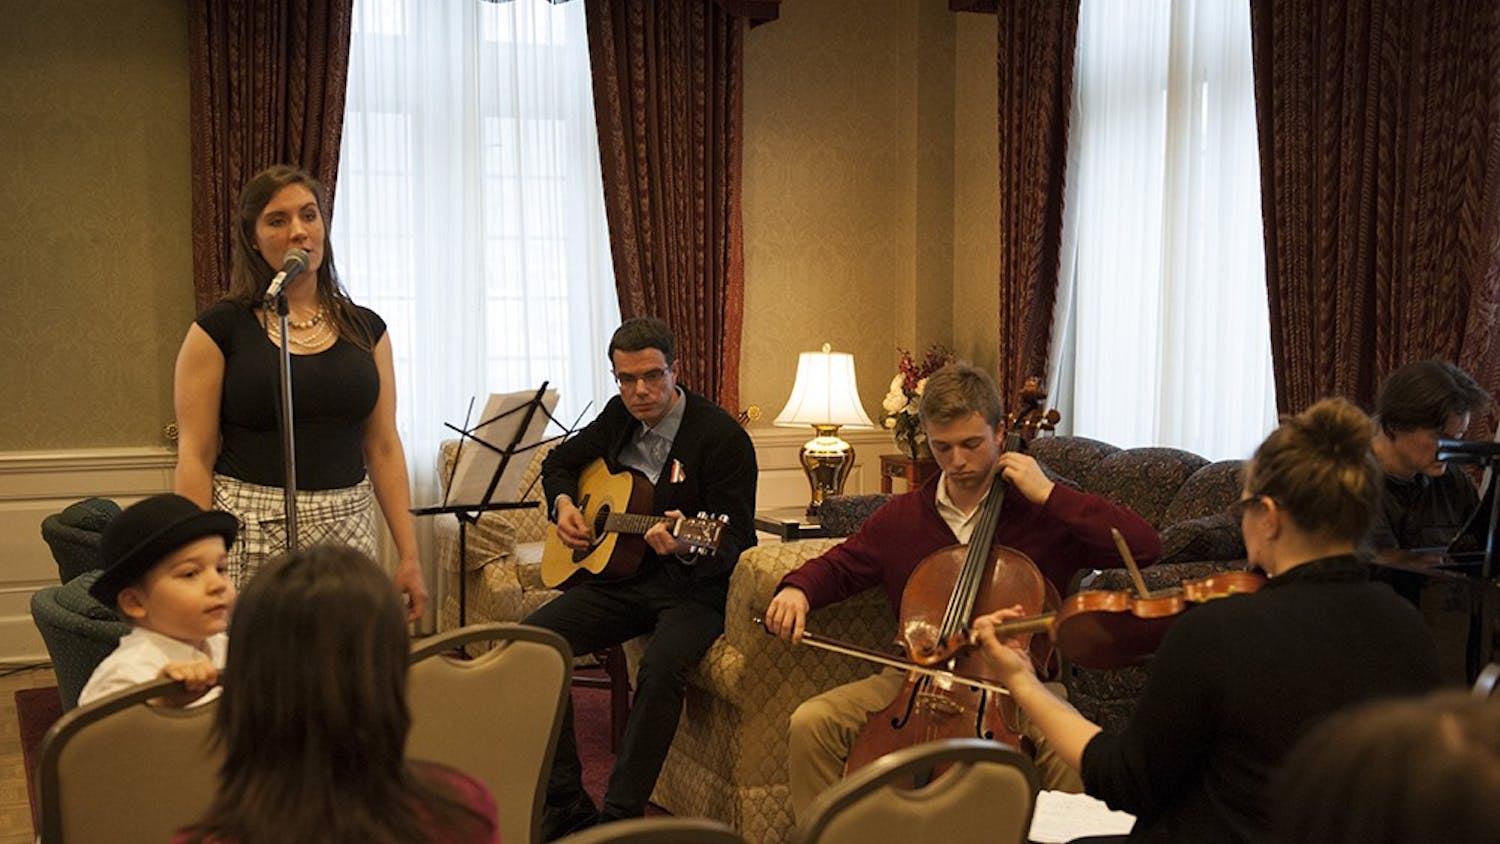 Jessica Storey-Nagy (left in black), Hungarian Cultural Association President, together with the band consisting of Dr. Bence Ságvári, Isaac Bershady, Phil Hanley and Deb Shebish performing traditional Hungarian folk songs to the people present at the Commemoration of the 1848 Hungarian Revolution. The event was held on Tuesday at the University Club President's Room at the IMU. 